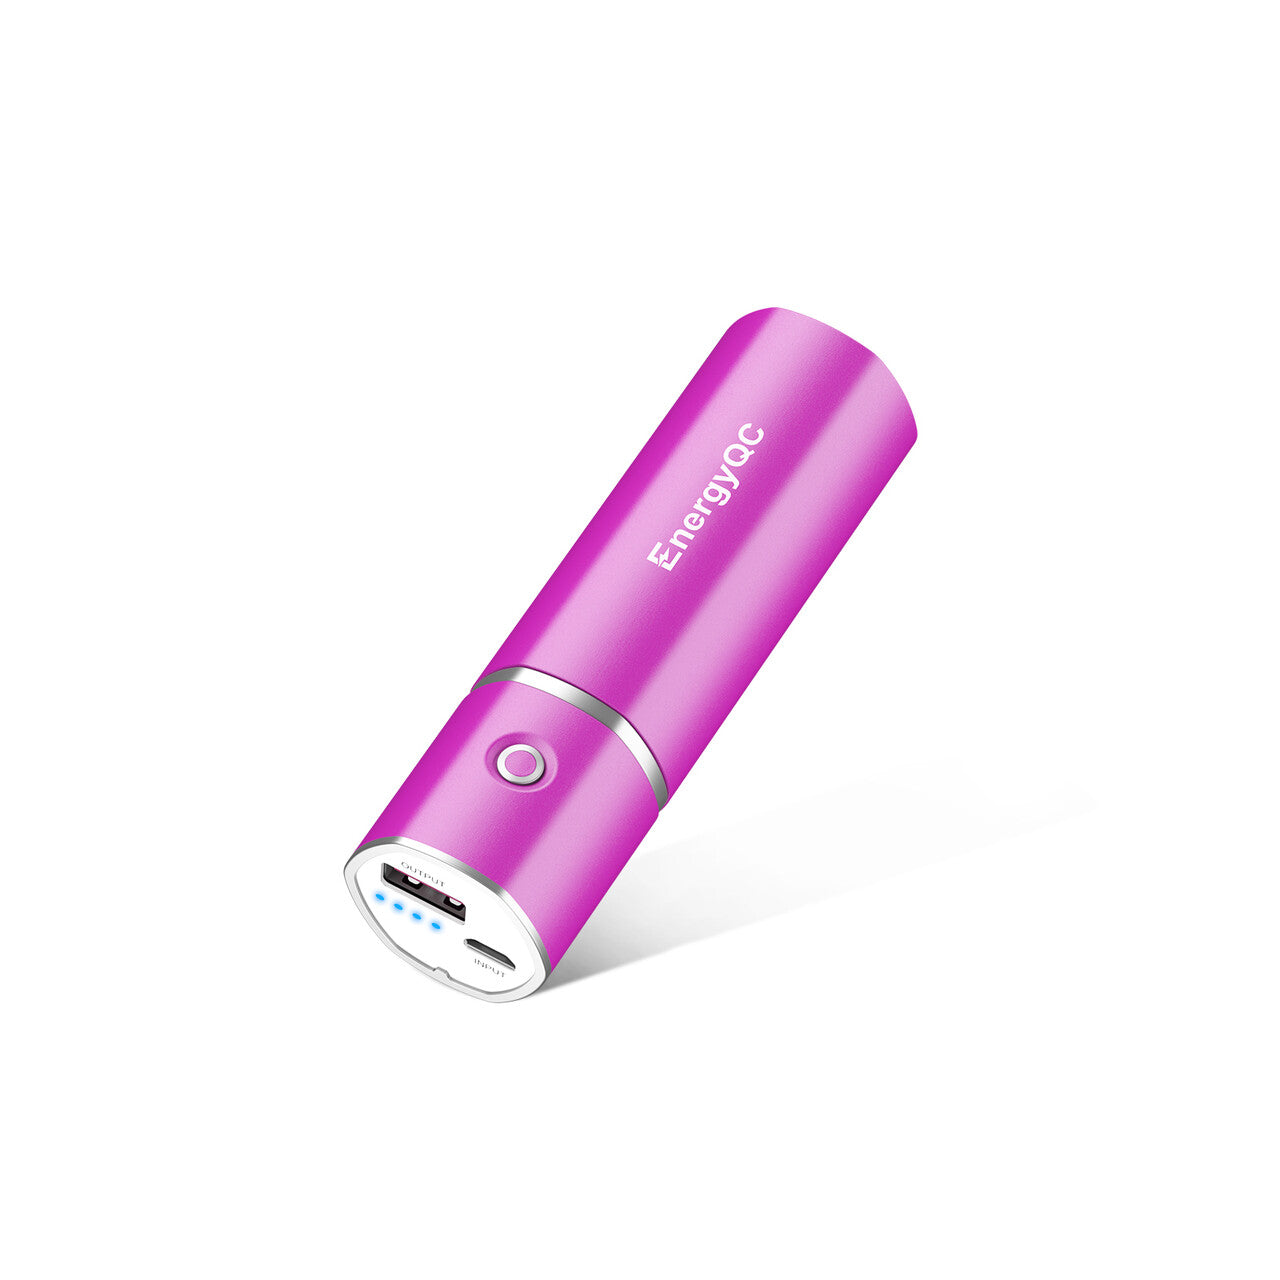 a purple Slim 2 Portable Charger